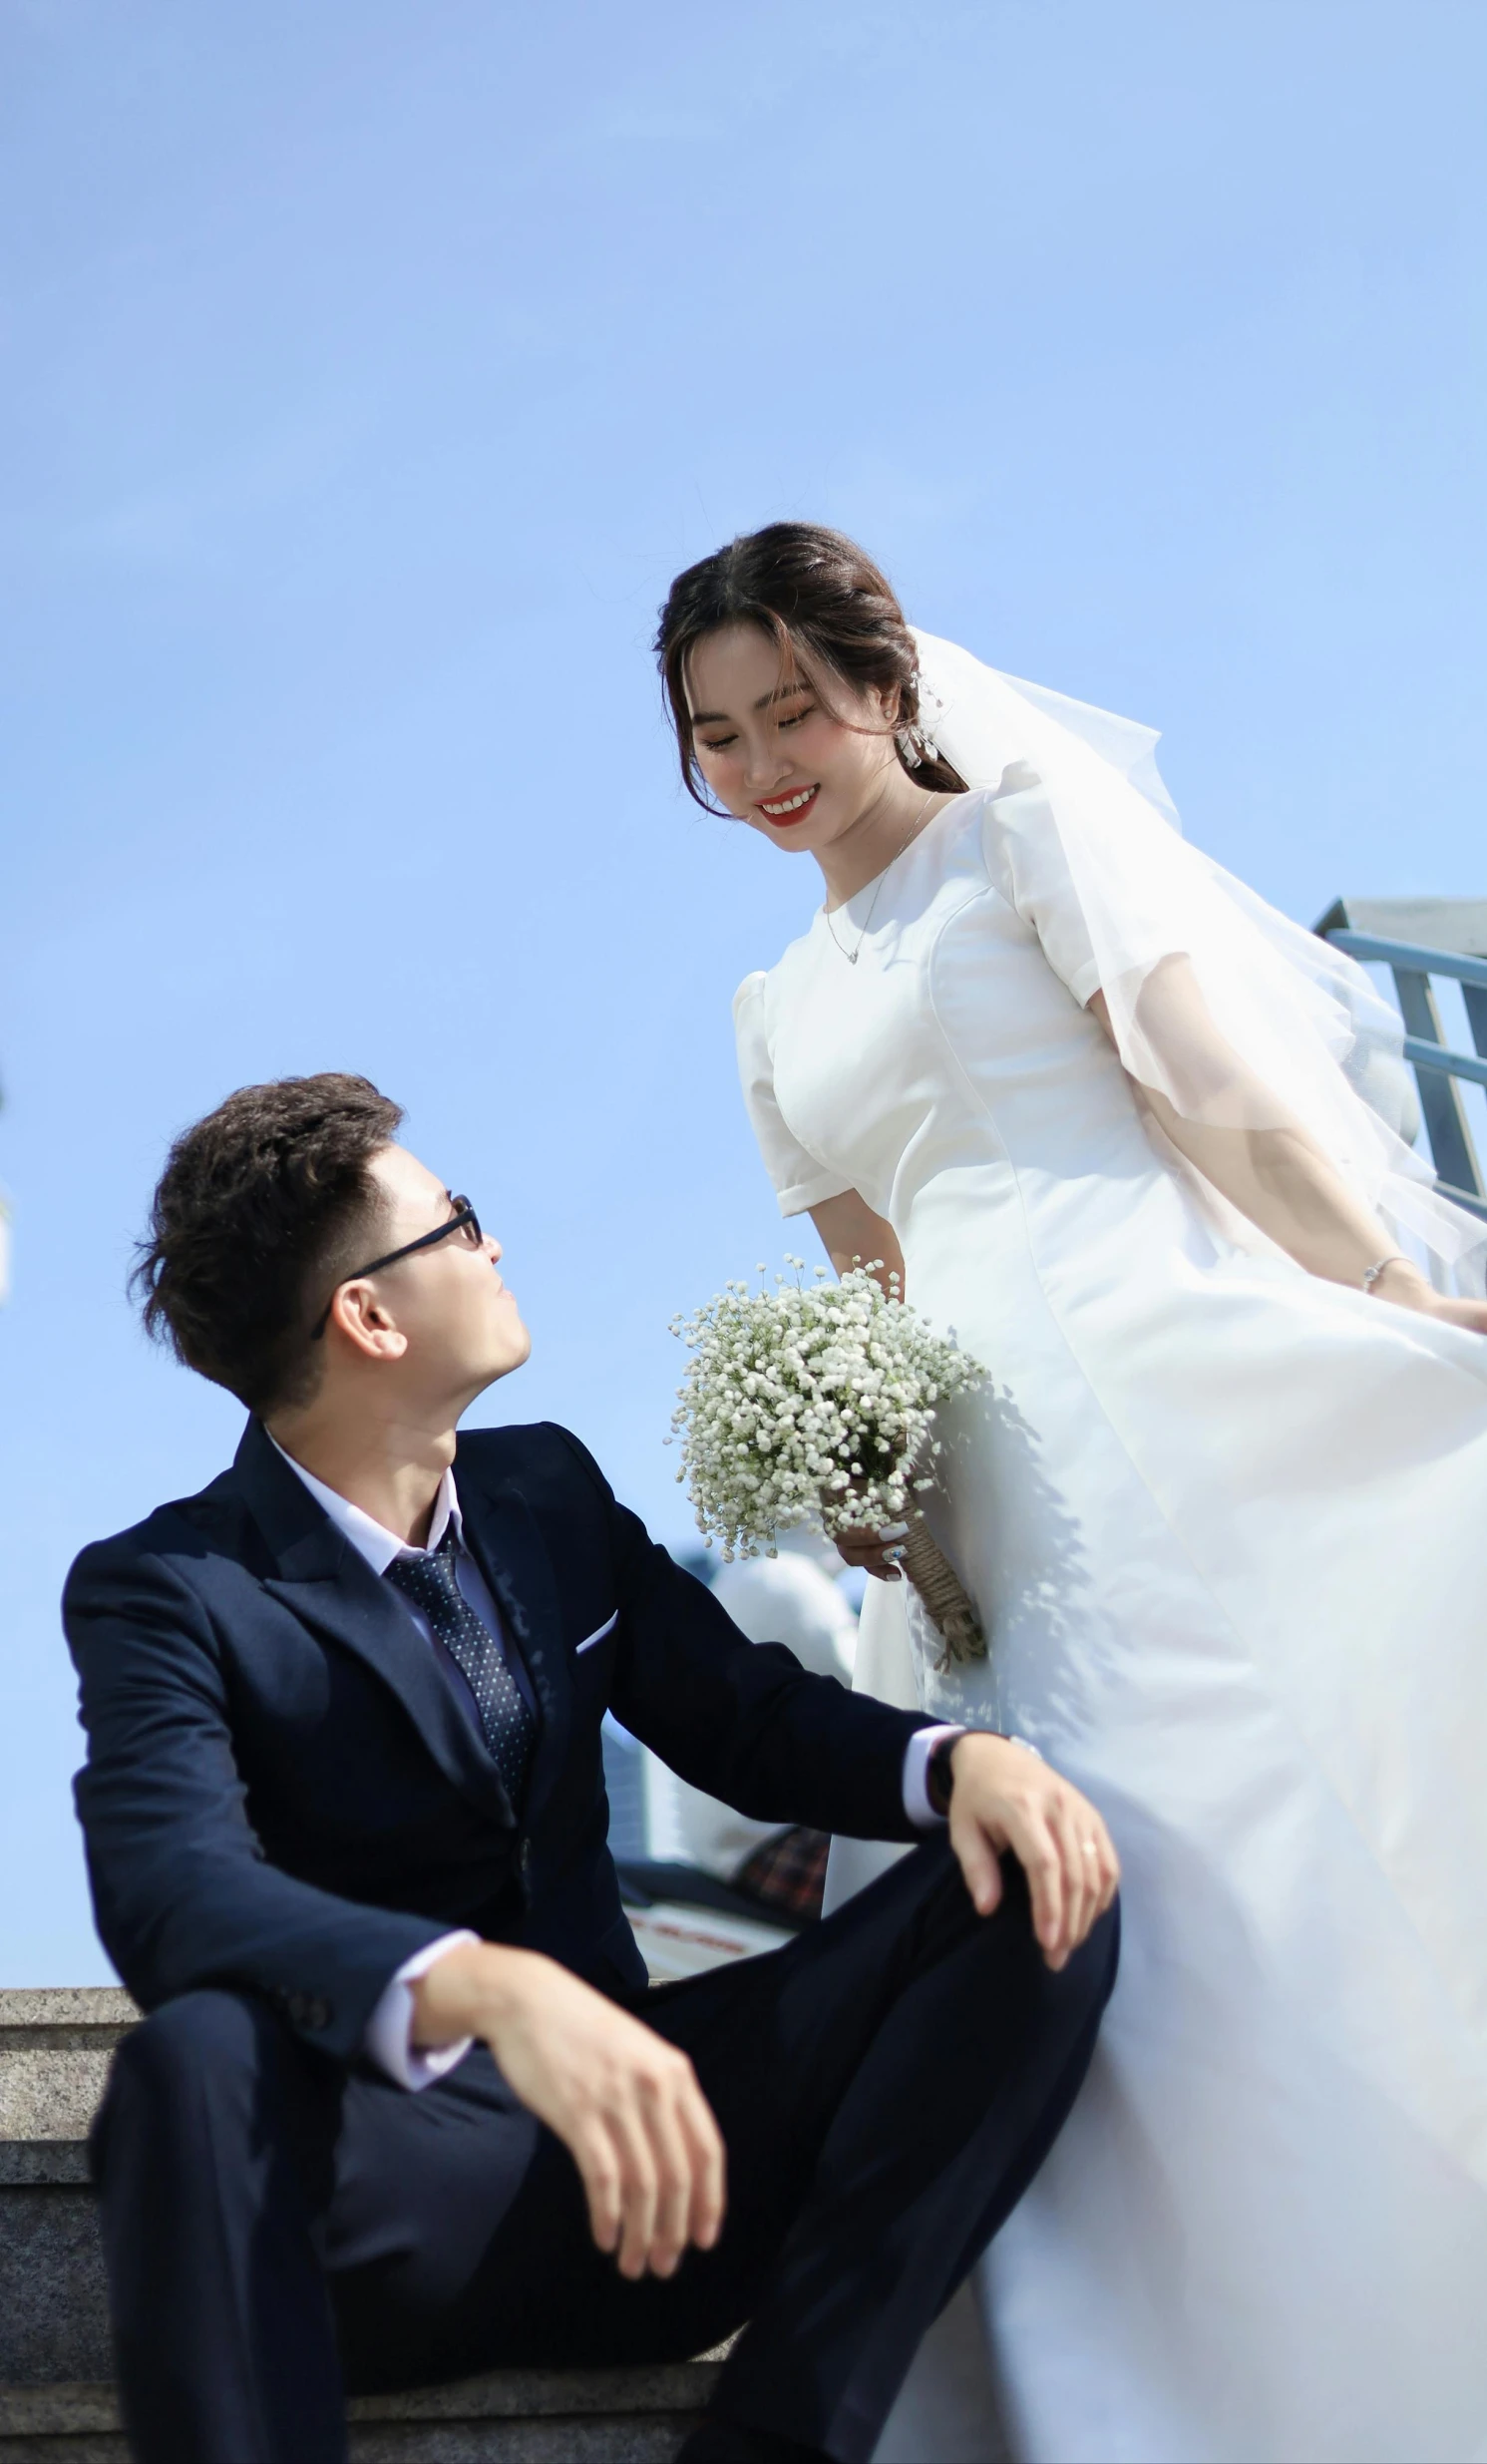 a young man in a suit sitting next to a young woman dressed in a white wedding dress